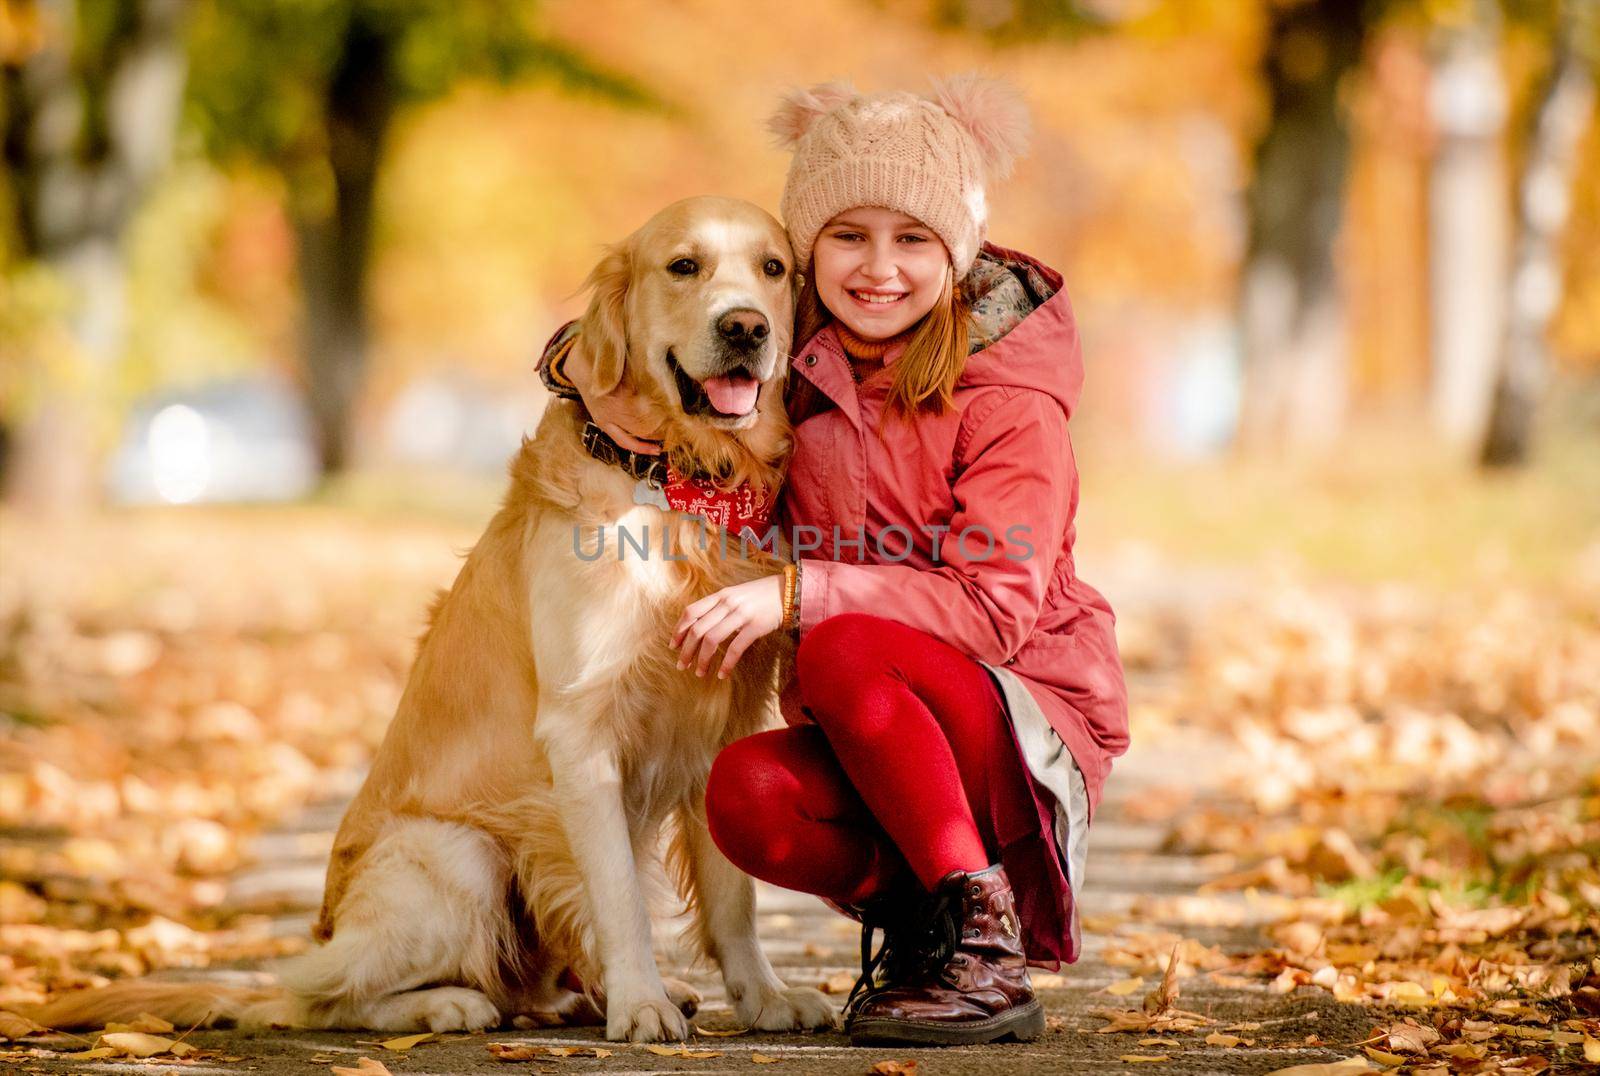 Preteen girl kid with golden retriever dog sitting at autumn park and hugging doggy. Beautiful portrait of child and pet outdoors at nature